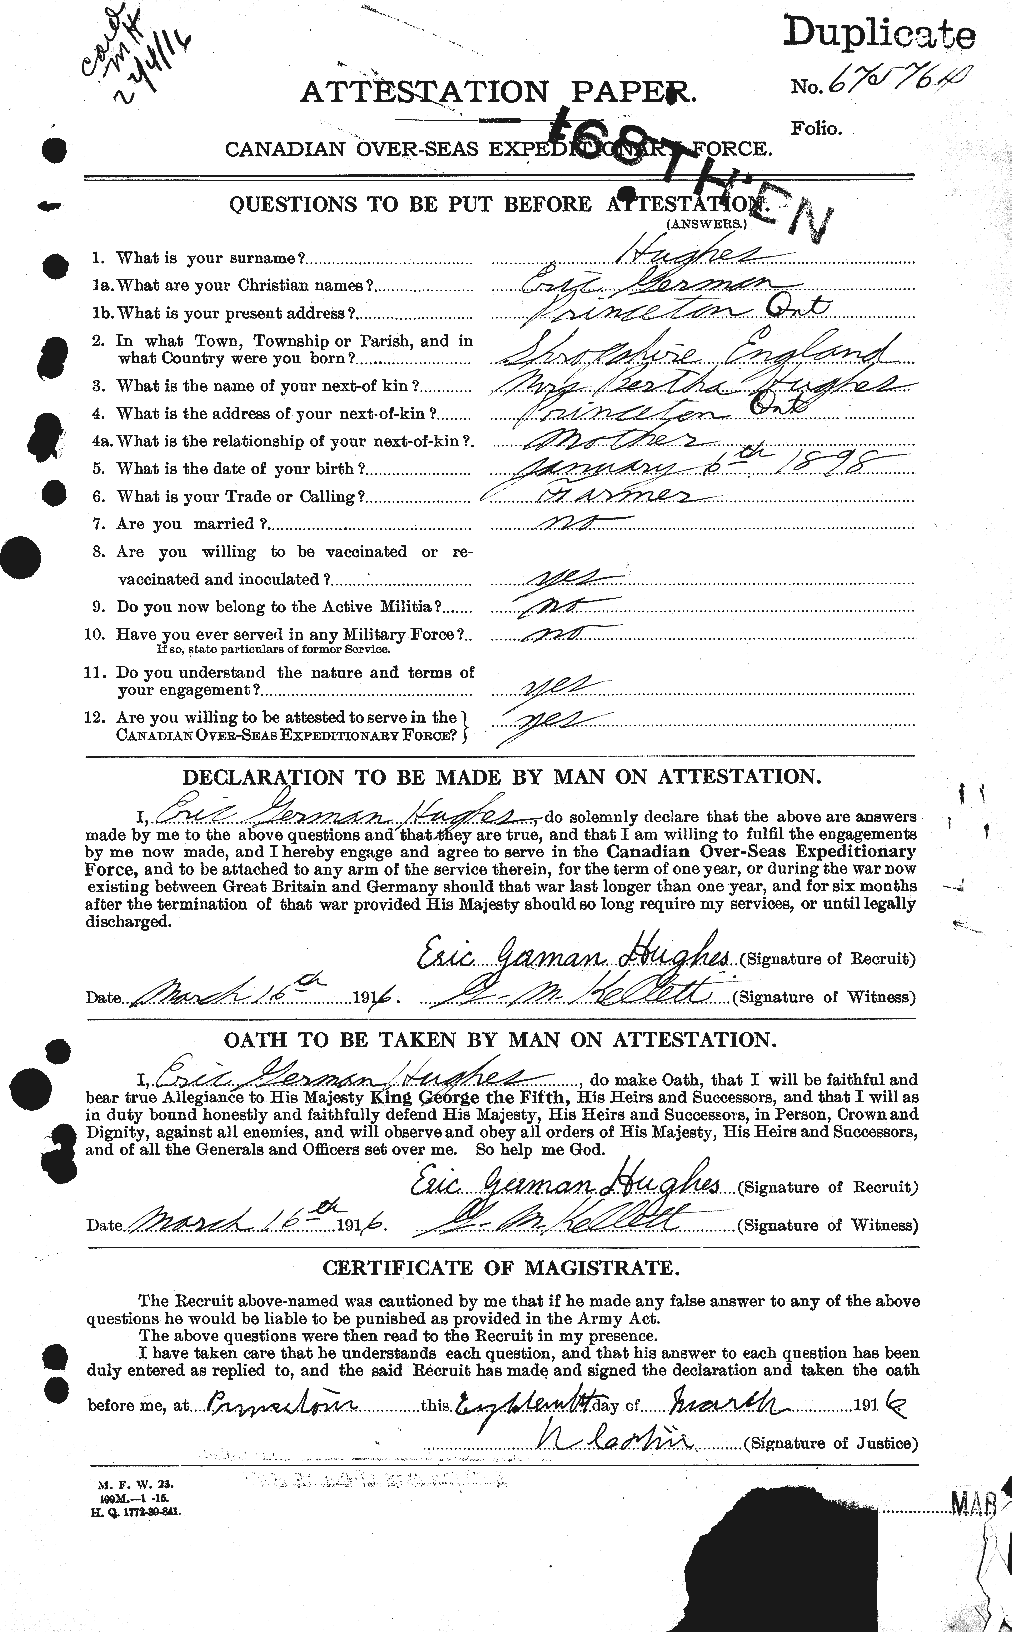 Personnel Records of the First World War - CEF 402708a